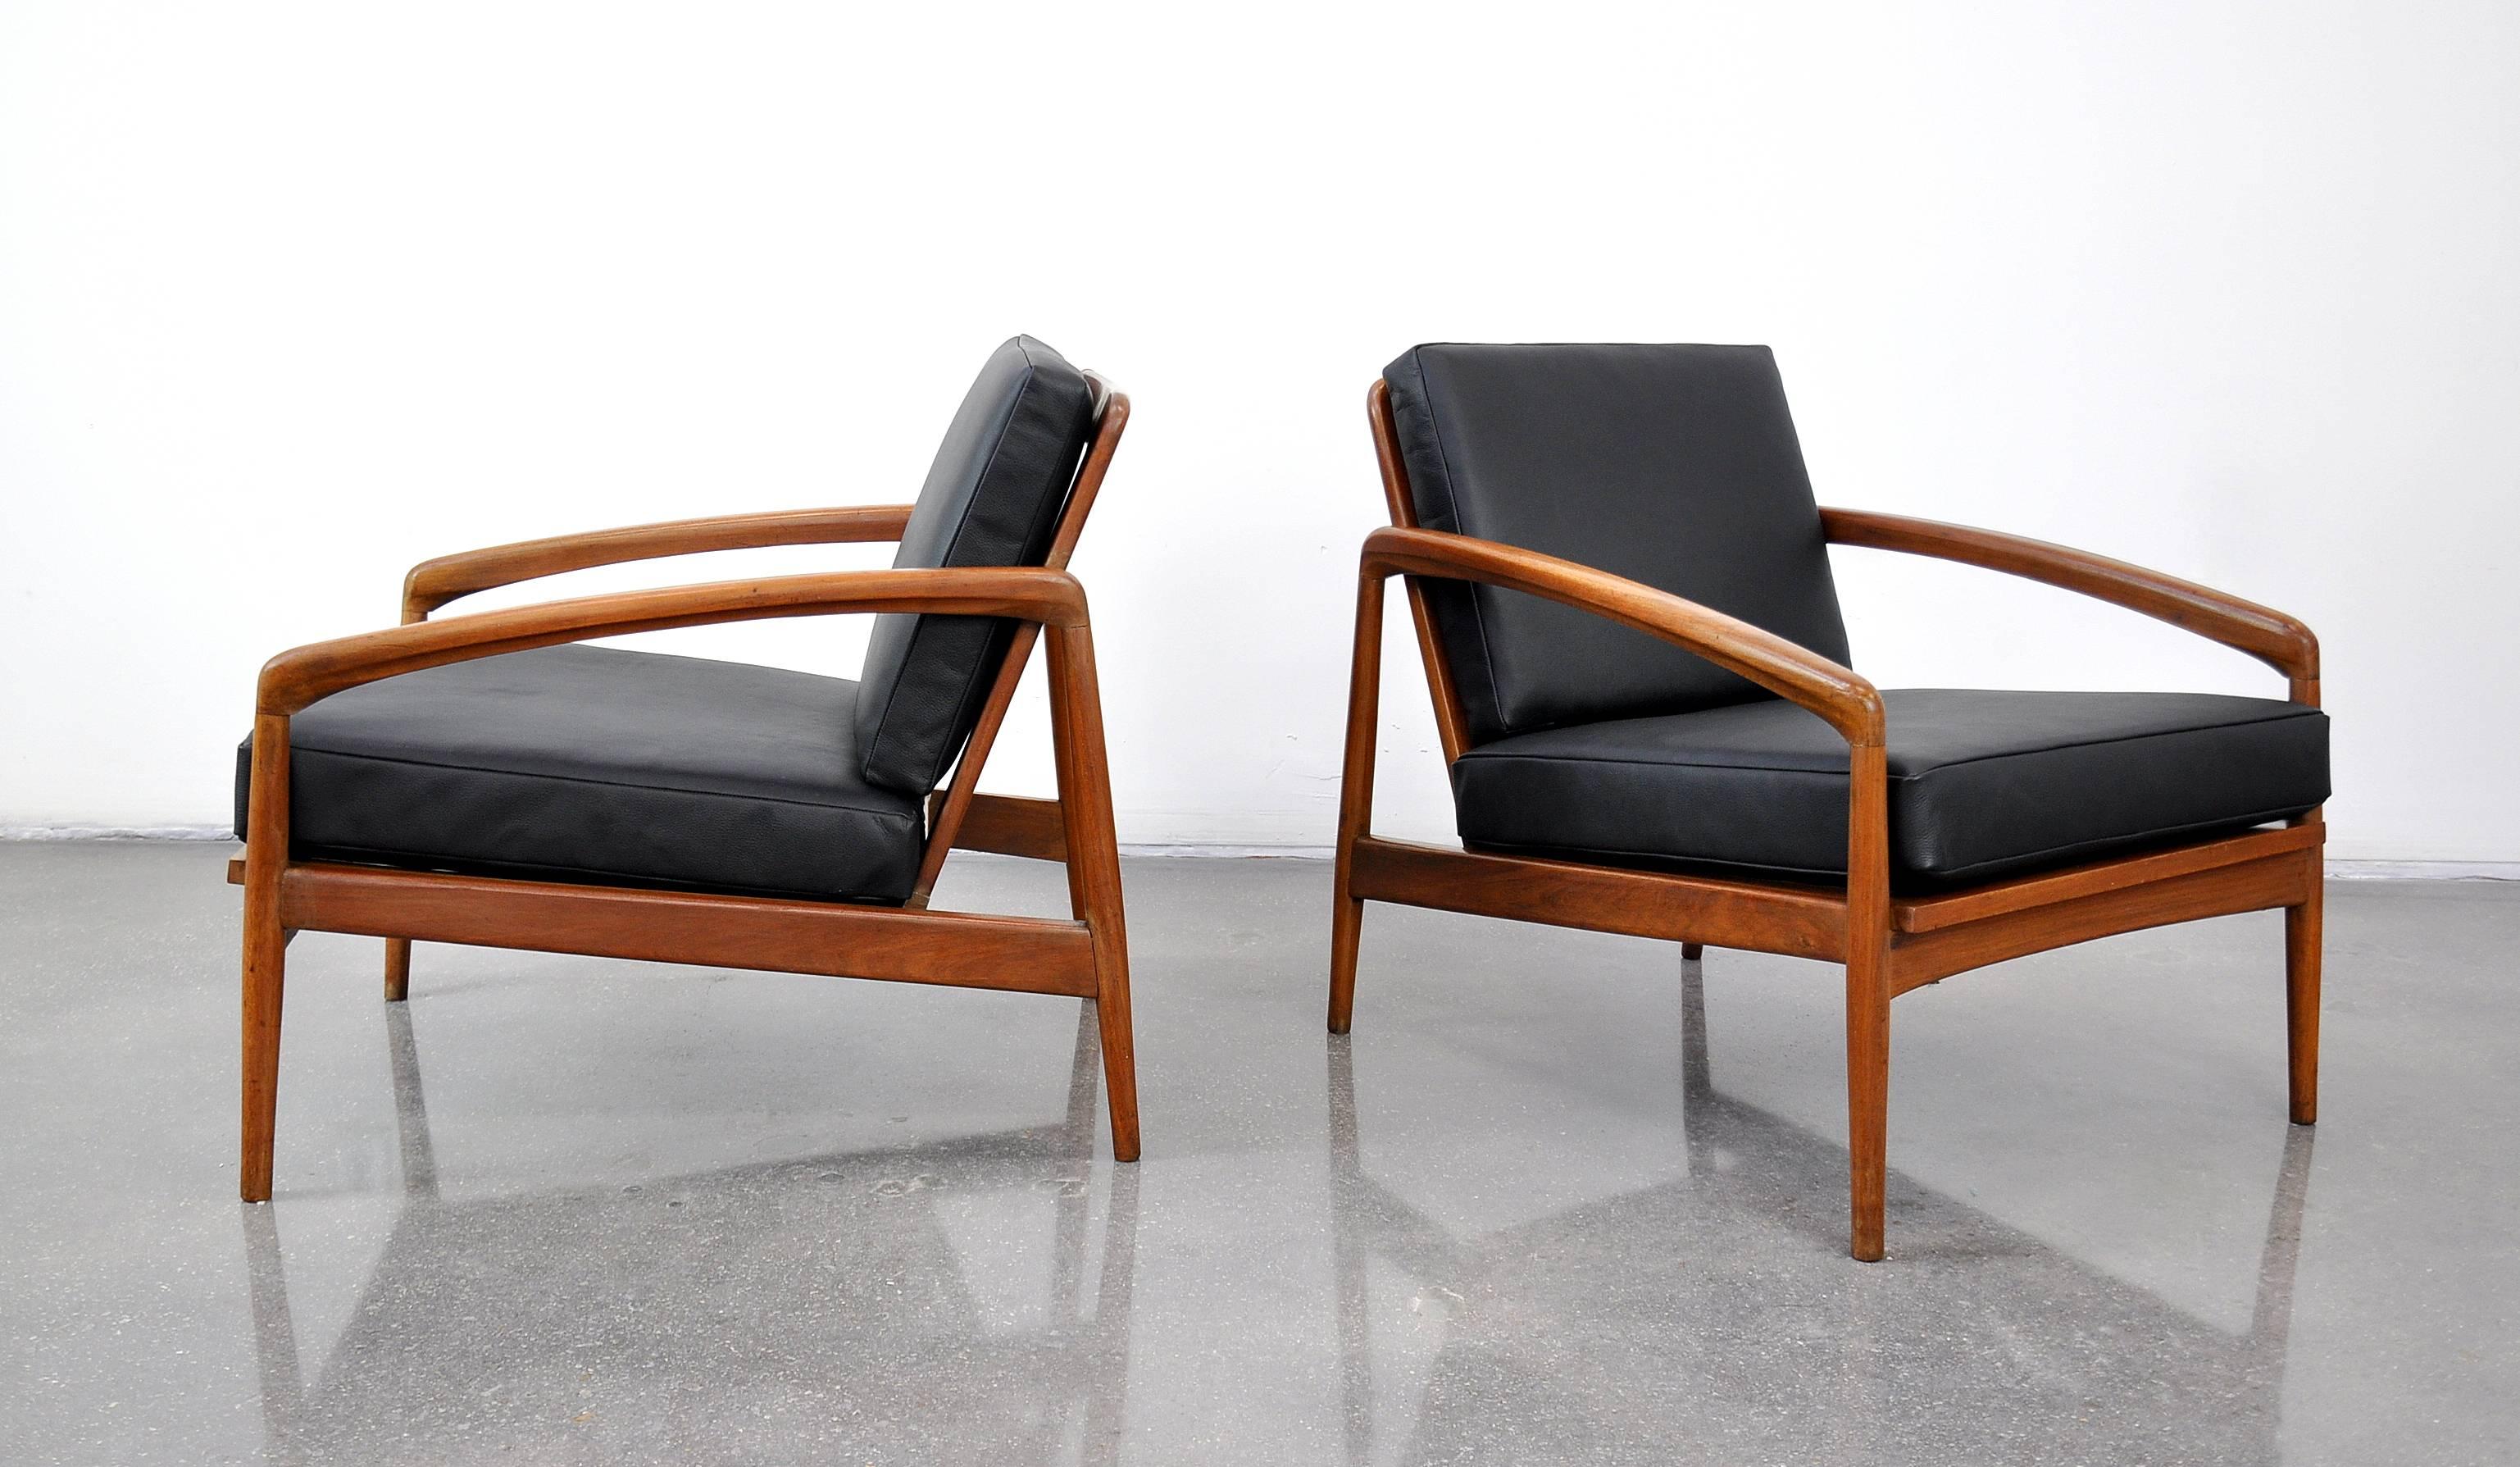 A pair of vintage Mid-Century teak easy chairs, dating from the 1950s and attributed to or in the style of designer Kai Kristiansen's Paper Knife chairs. The frames have sleek, slender arms, slatted backs and seats, and new removable cushions in